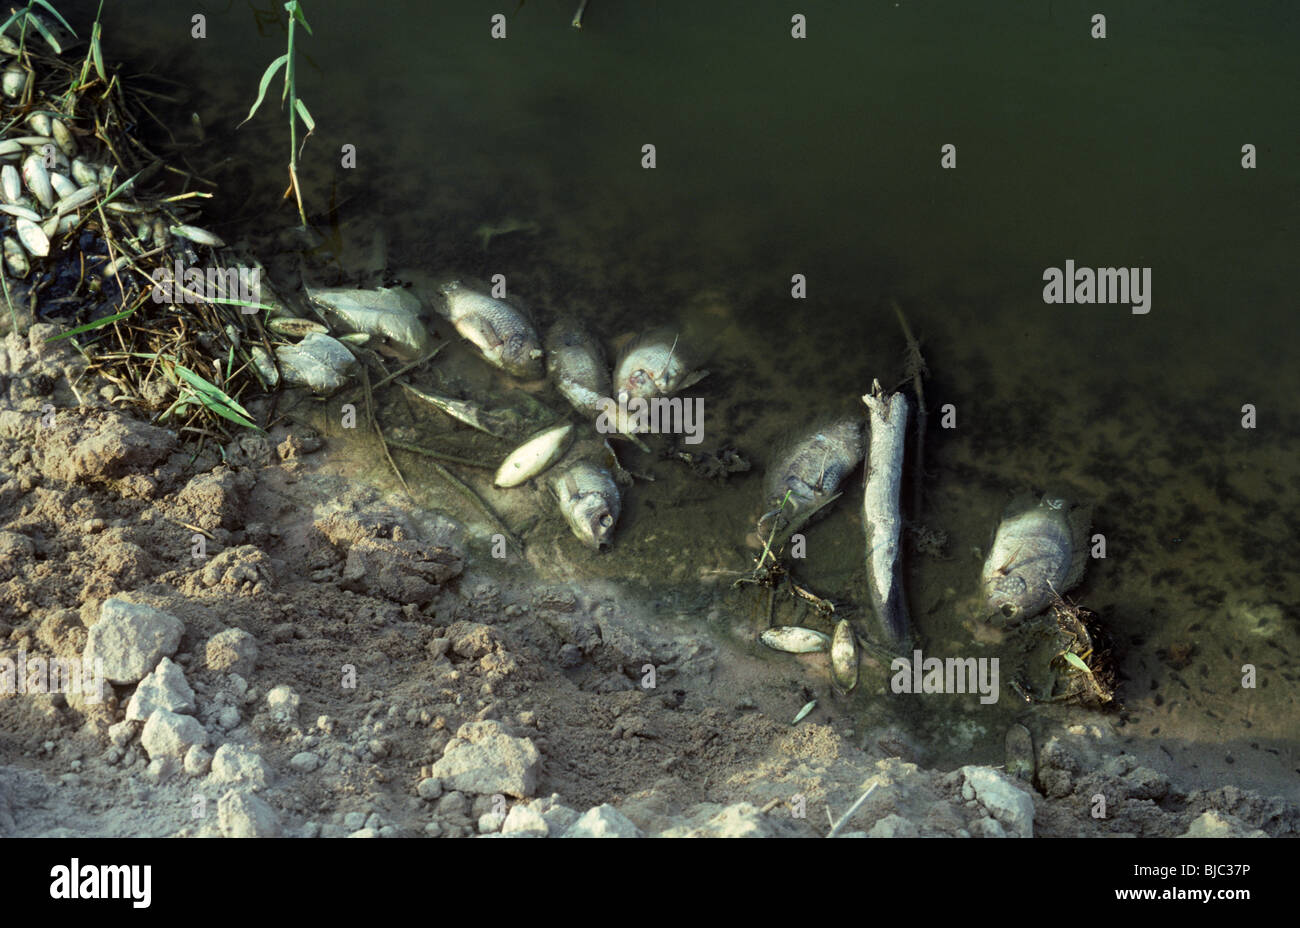 Dead fish at the edge of a polluted lake in Thailand Stock Photo